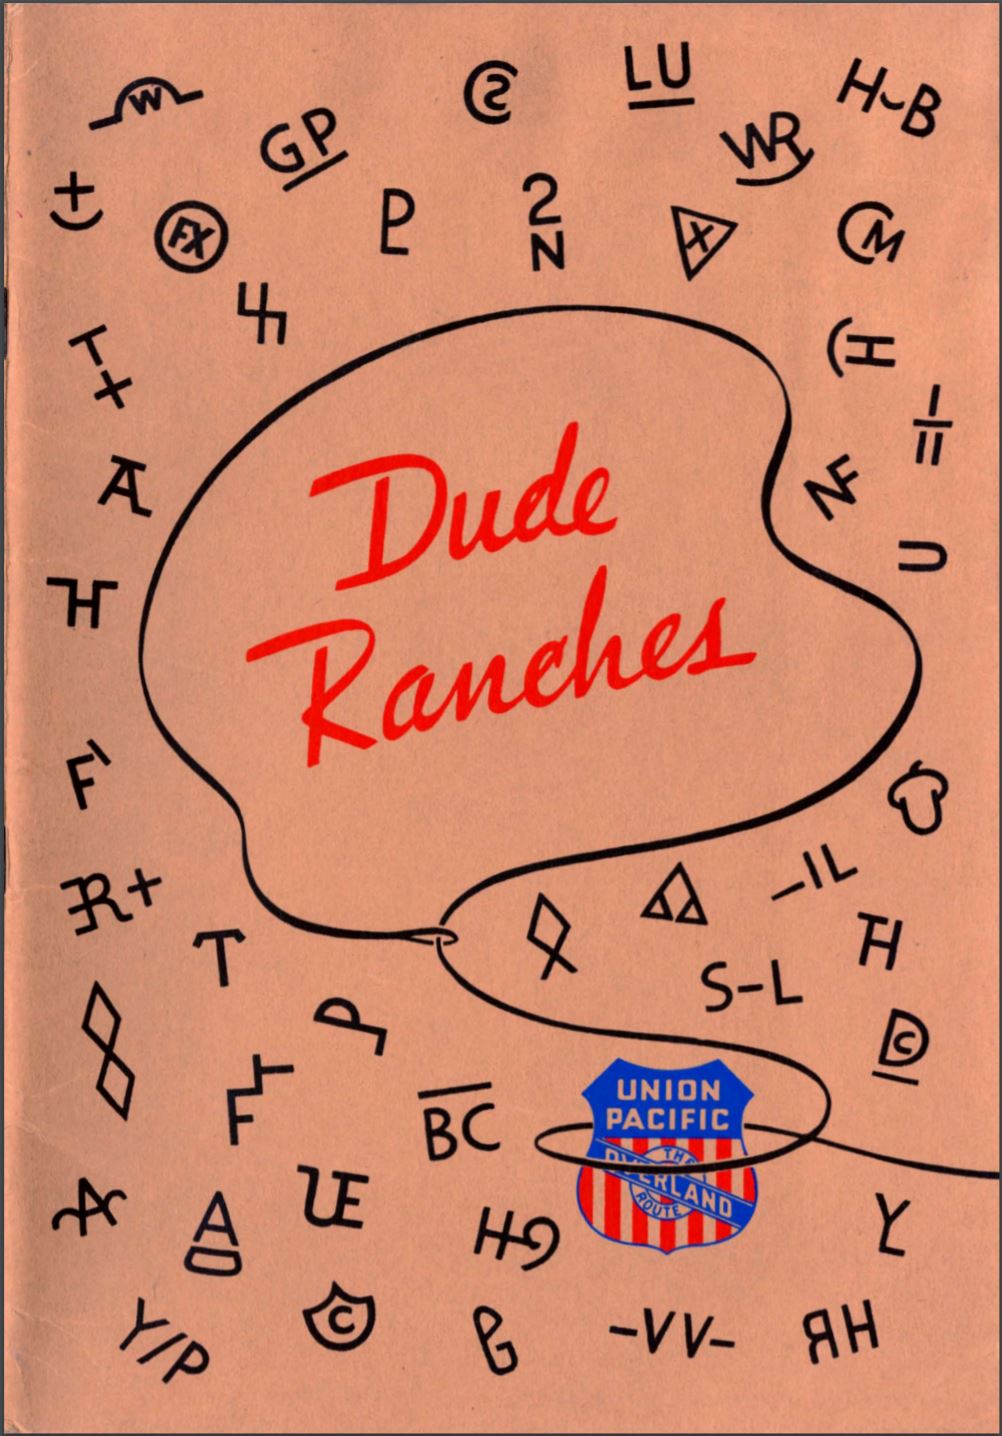 Image of the cover of the publication Dude Ranches Out West, distributed by the Union Pacific Railroad. This issue was published in 1937, and the cover features graphics--images of cattle brand logos used by rancher-- and the title of the publication, as well as the Union Pacific Railroad logo in the lower right corner.